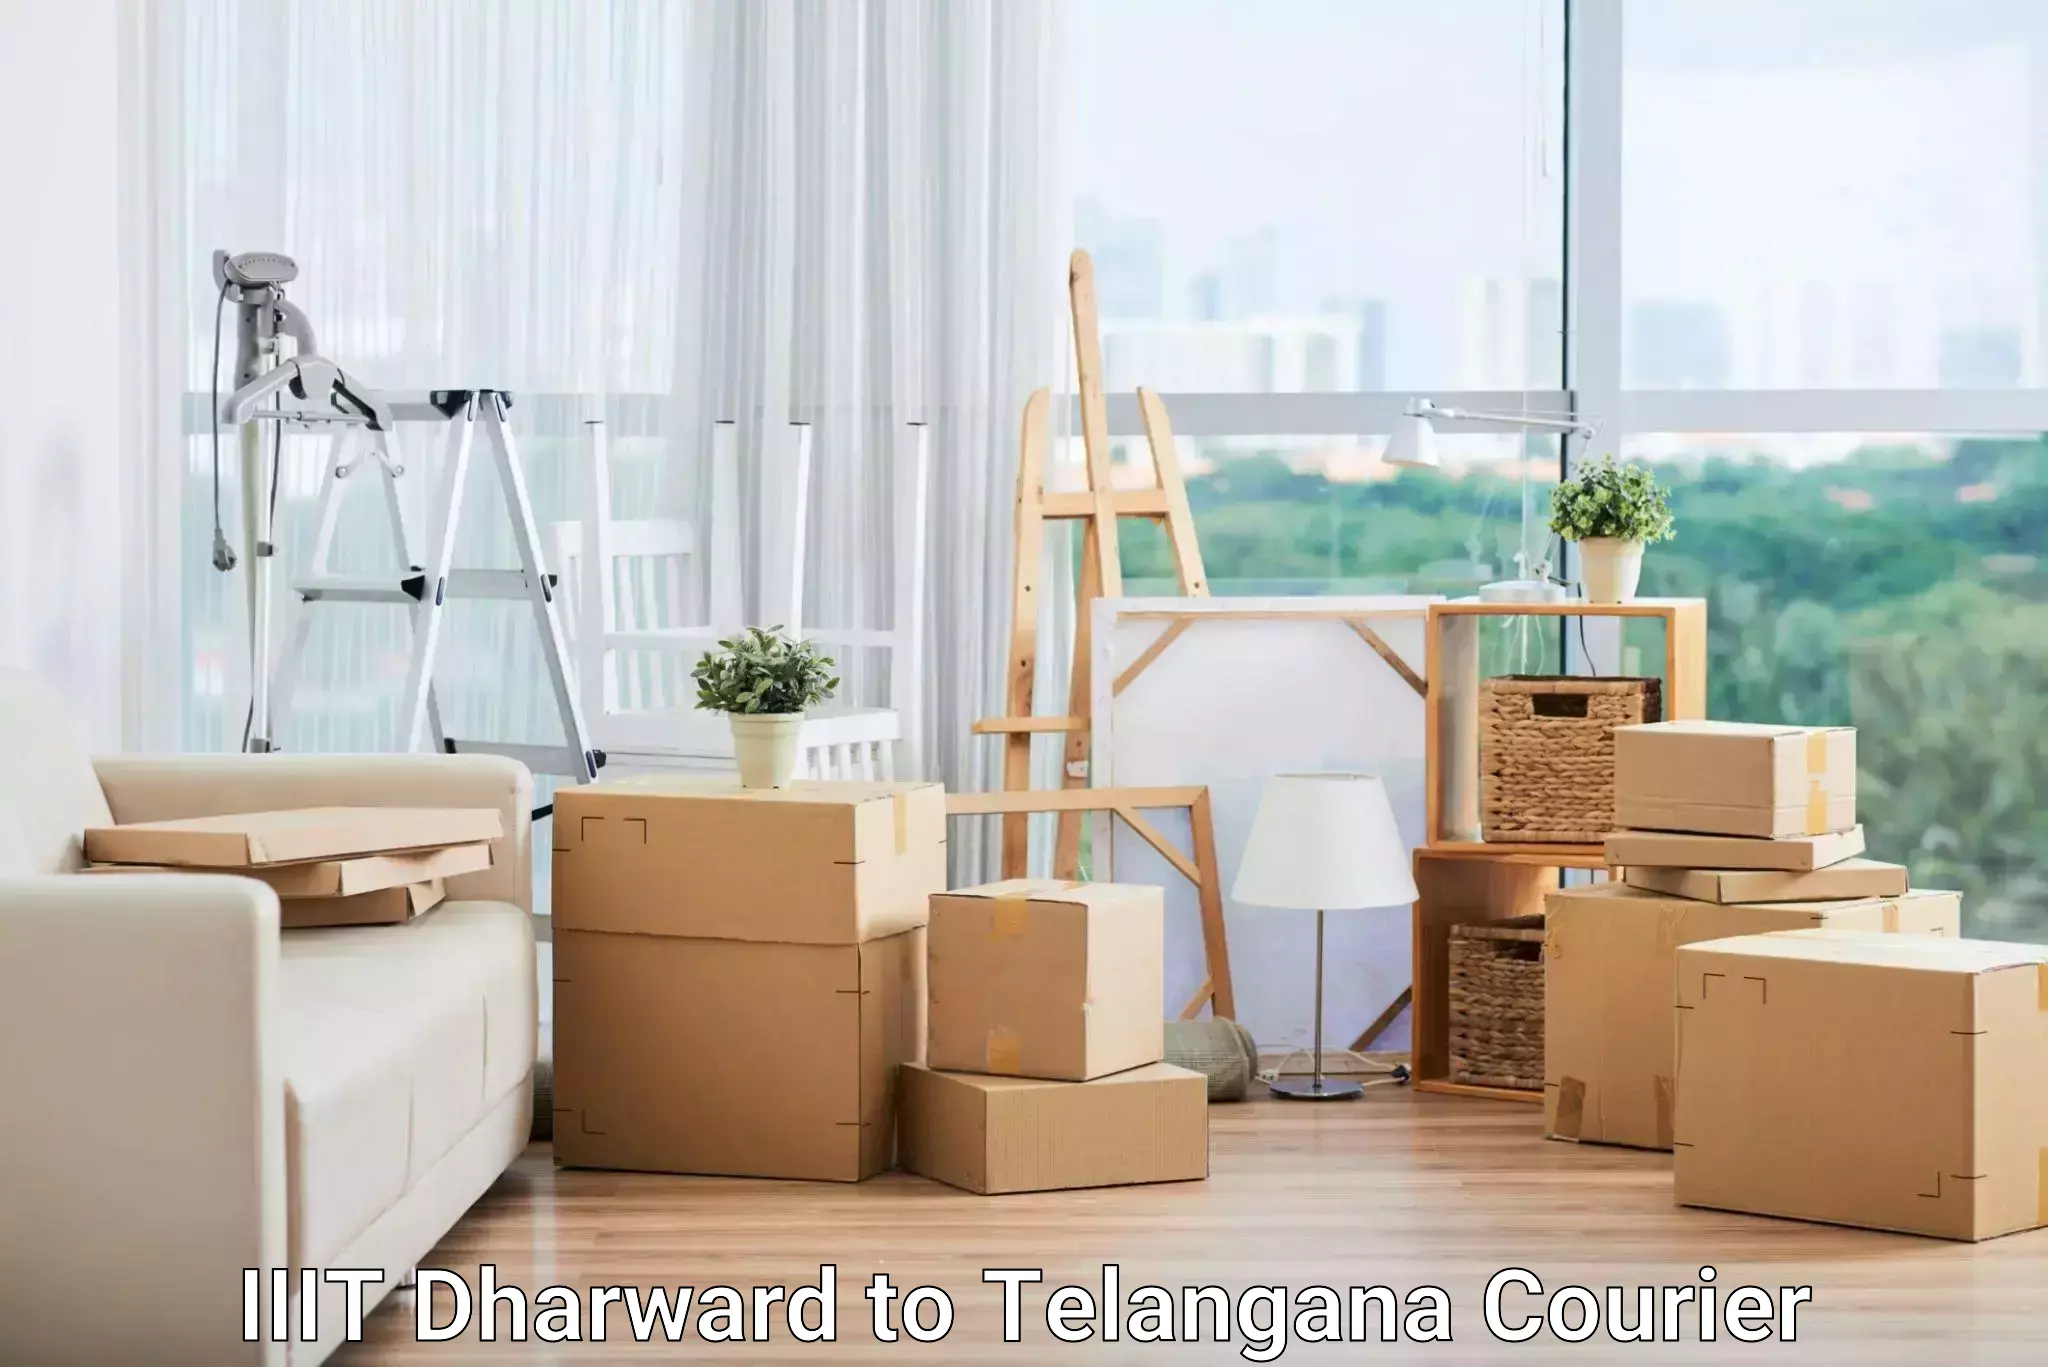 User-friendly courier app IIIT Dharward to Jogipet